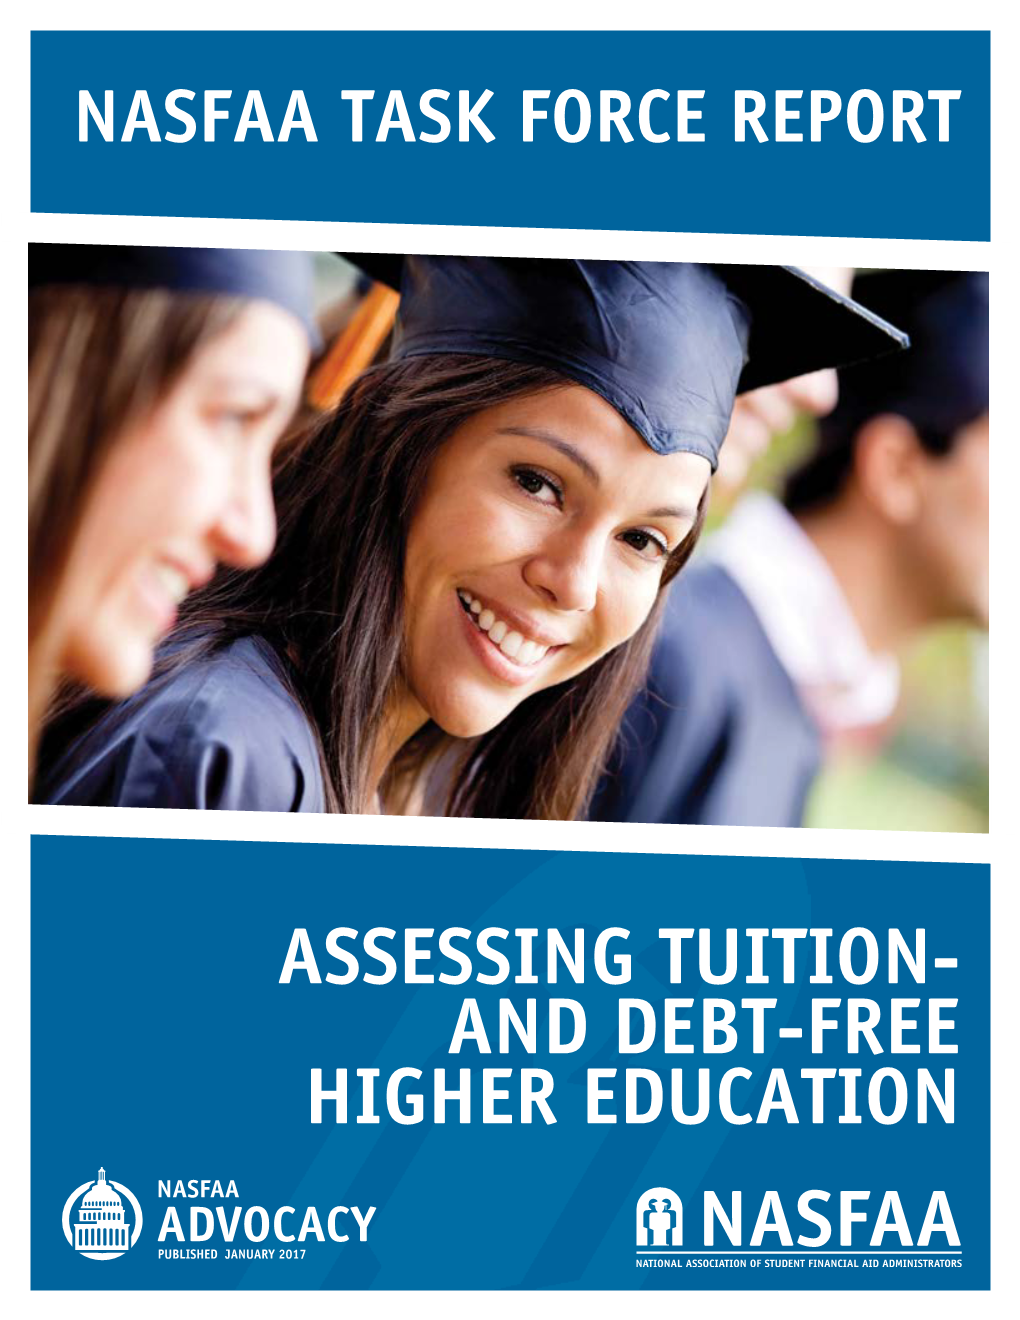 Assessing Tuition- and Debt-Free Higher Education